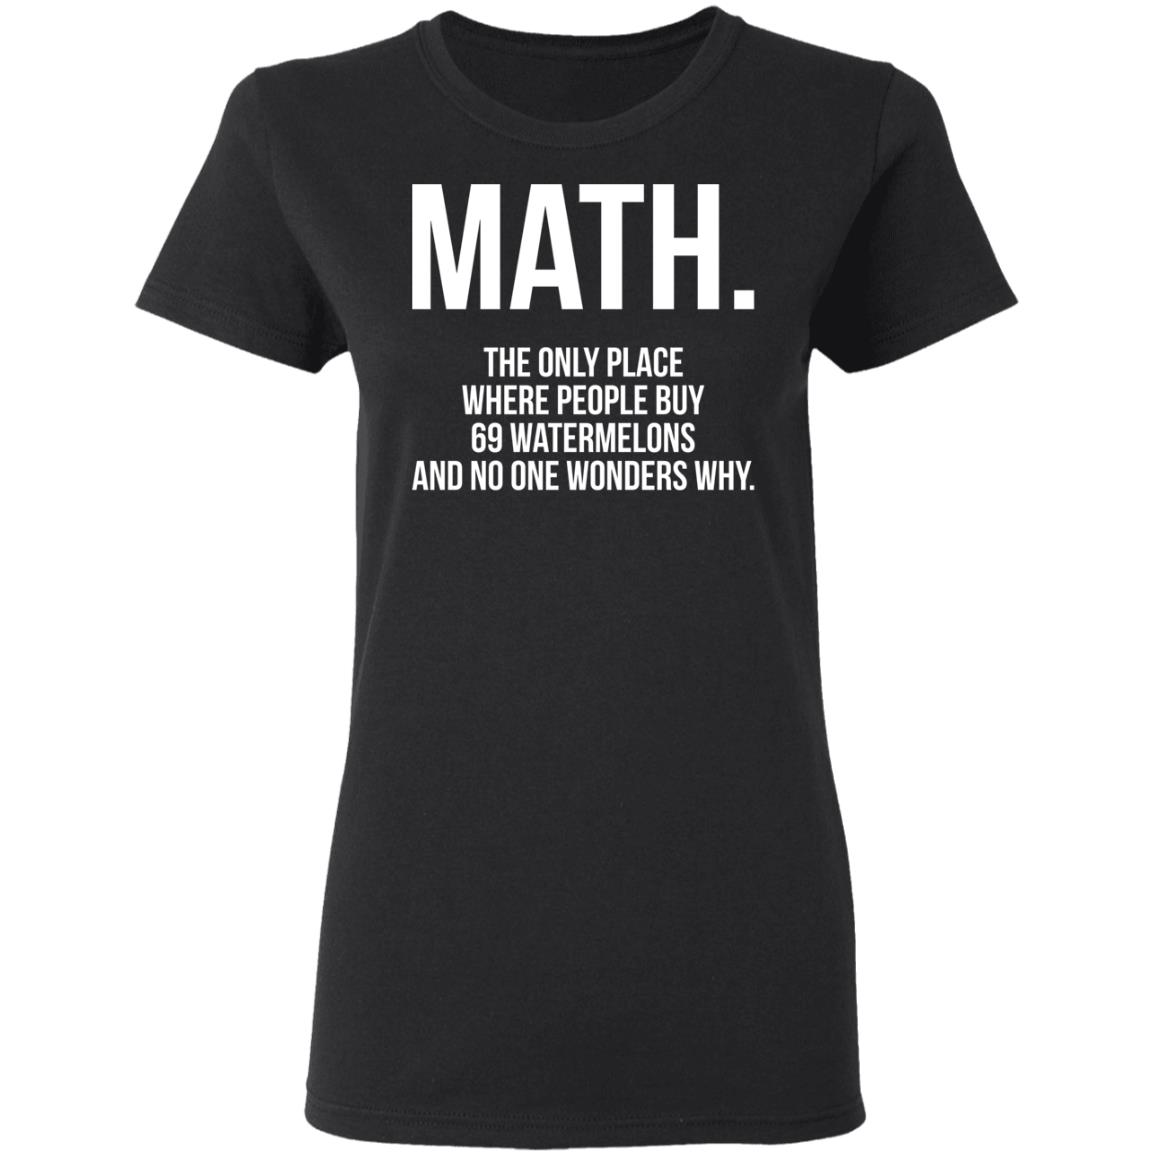 Math the only place where people buy 69 watermelons shirt - Bucktee.com